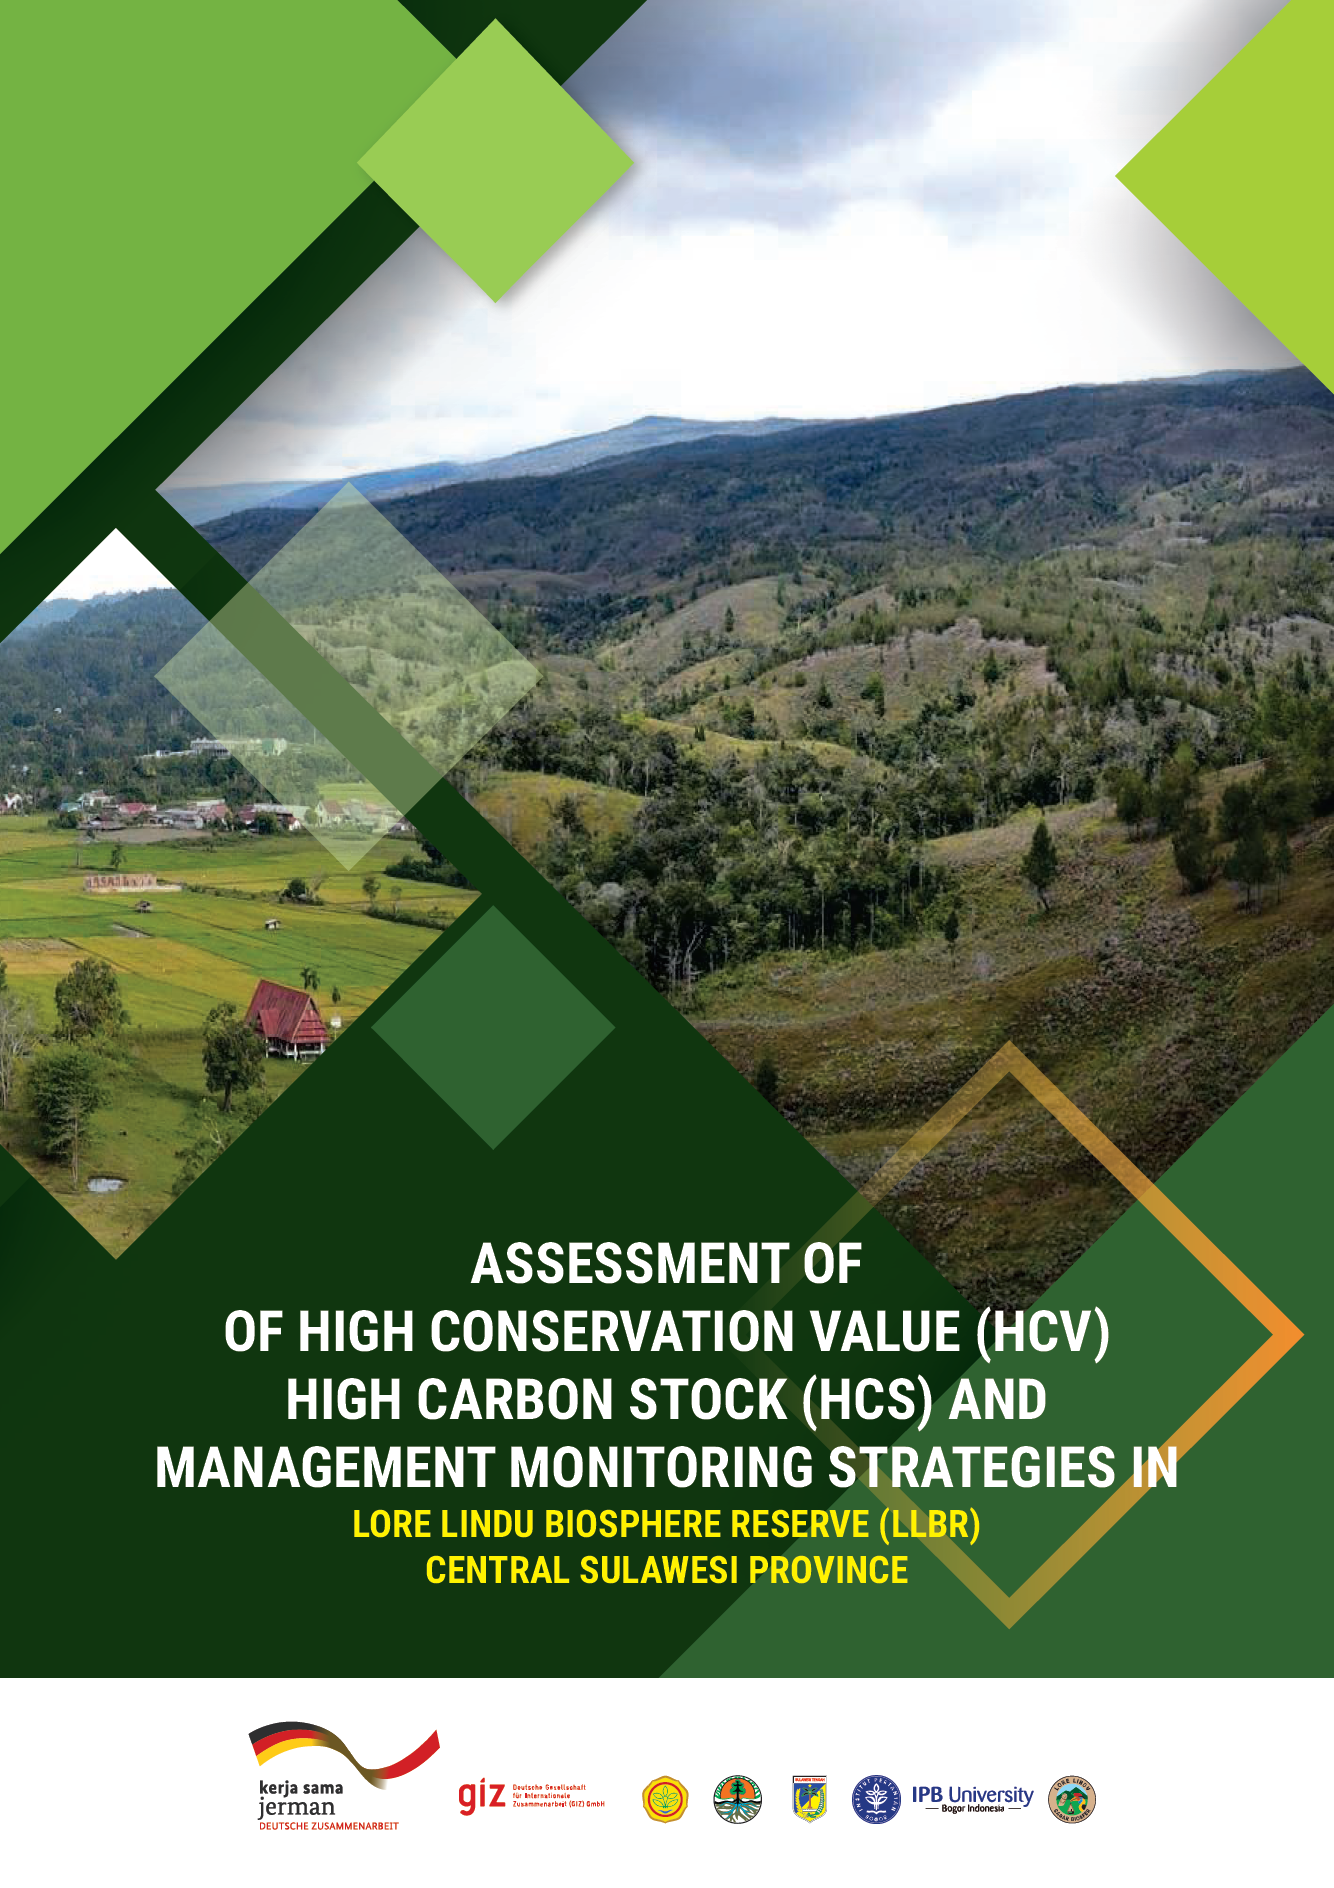 Assessment of High Conservation Value (HCV) High Carbon Stock (HCS) and Management Monitoring Strategies in Lore Lindu Biosphere Reserve (LLBR) Central Sulawesi Province